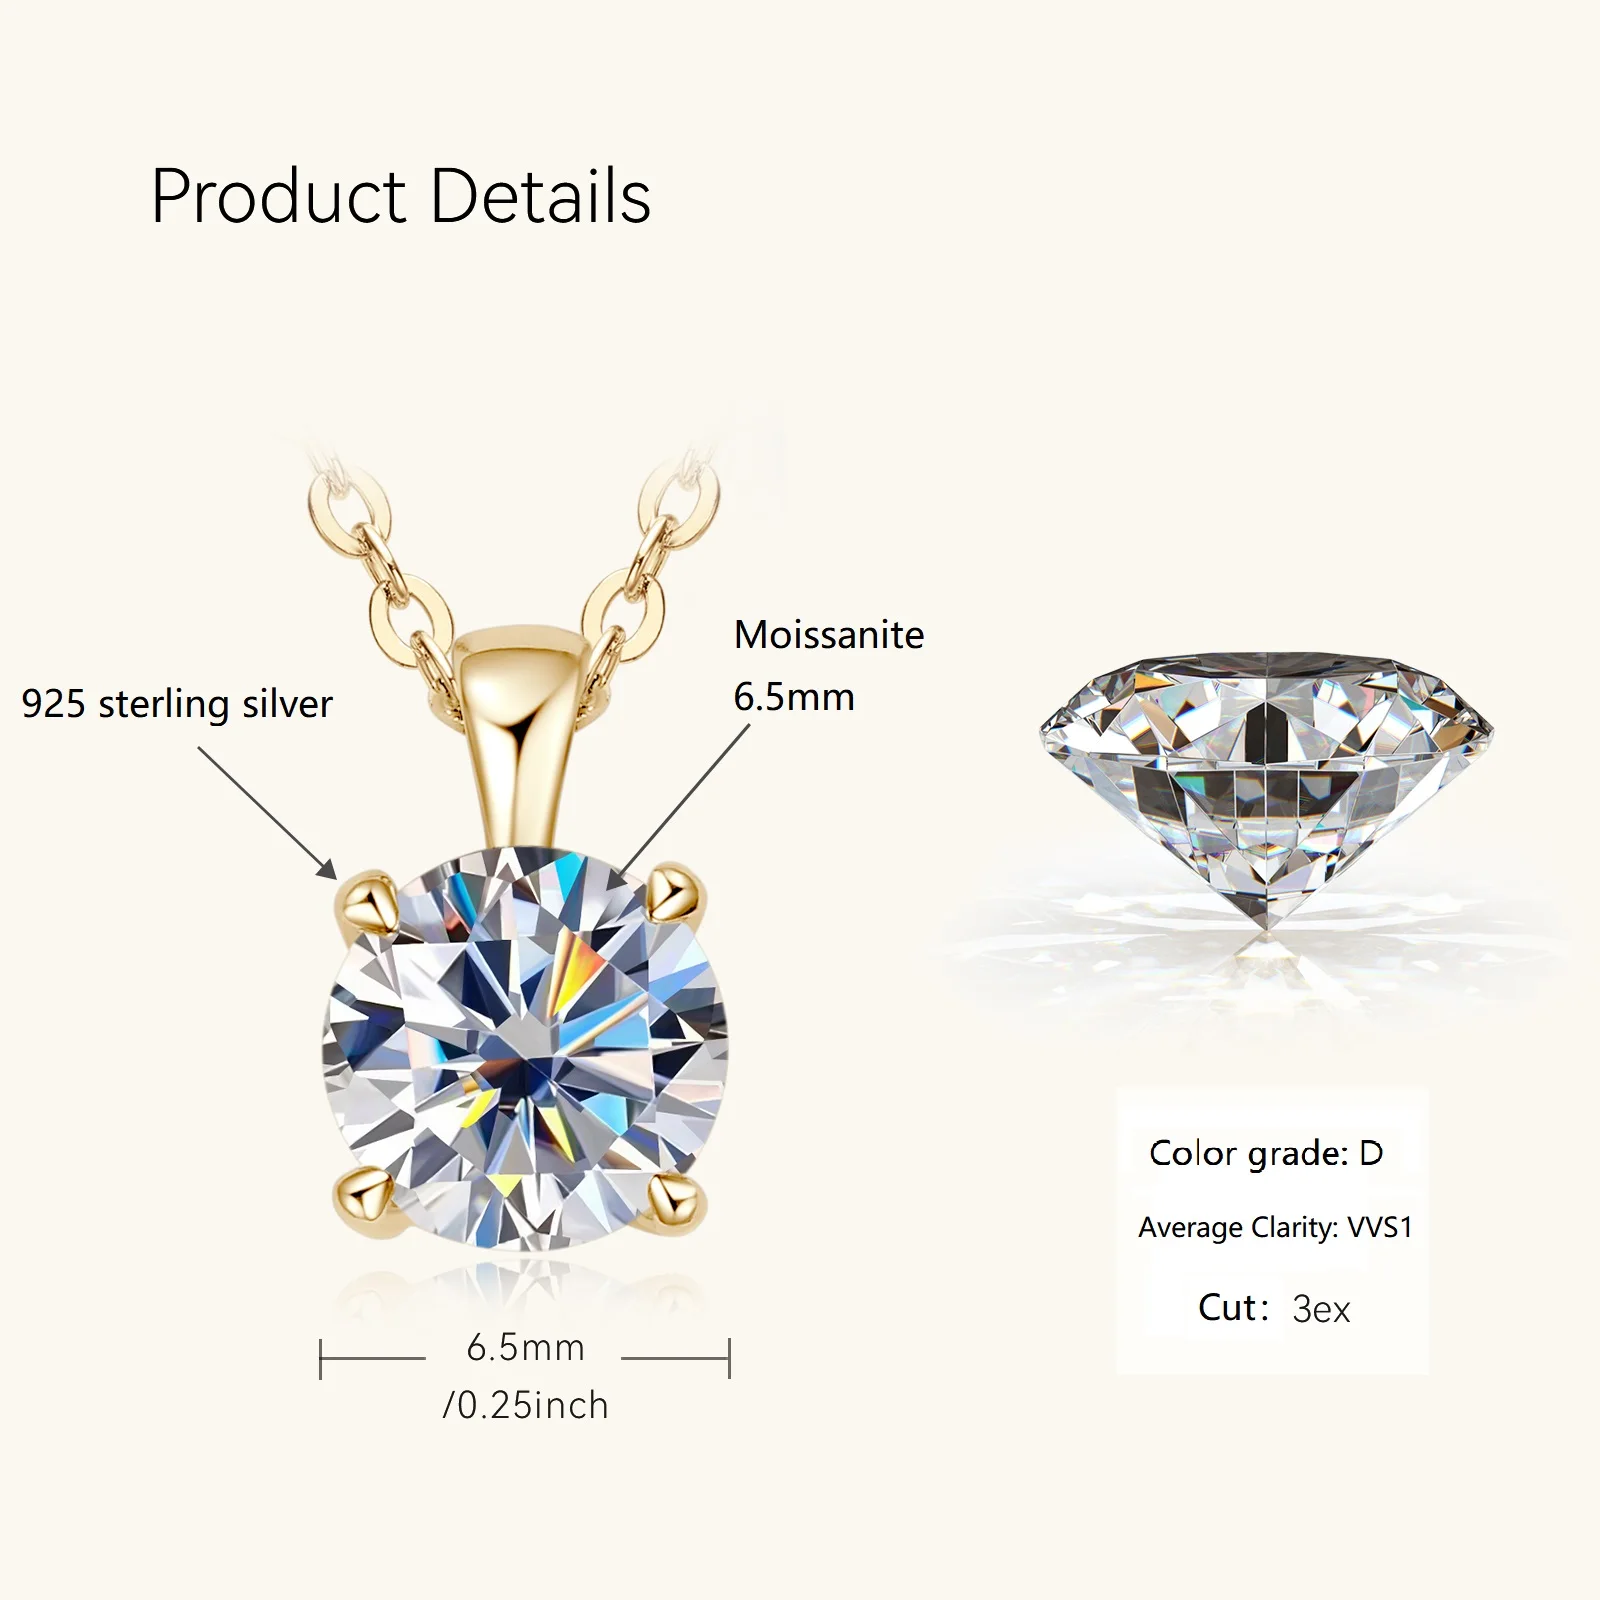 6.5mm 1.0 carat D Moissanite Solitaire Drop Necklaces 18k Gold Plated Pendant Original Real 925 Silver Chain Jewelry for Women images - 6